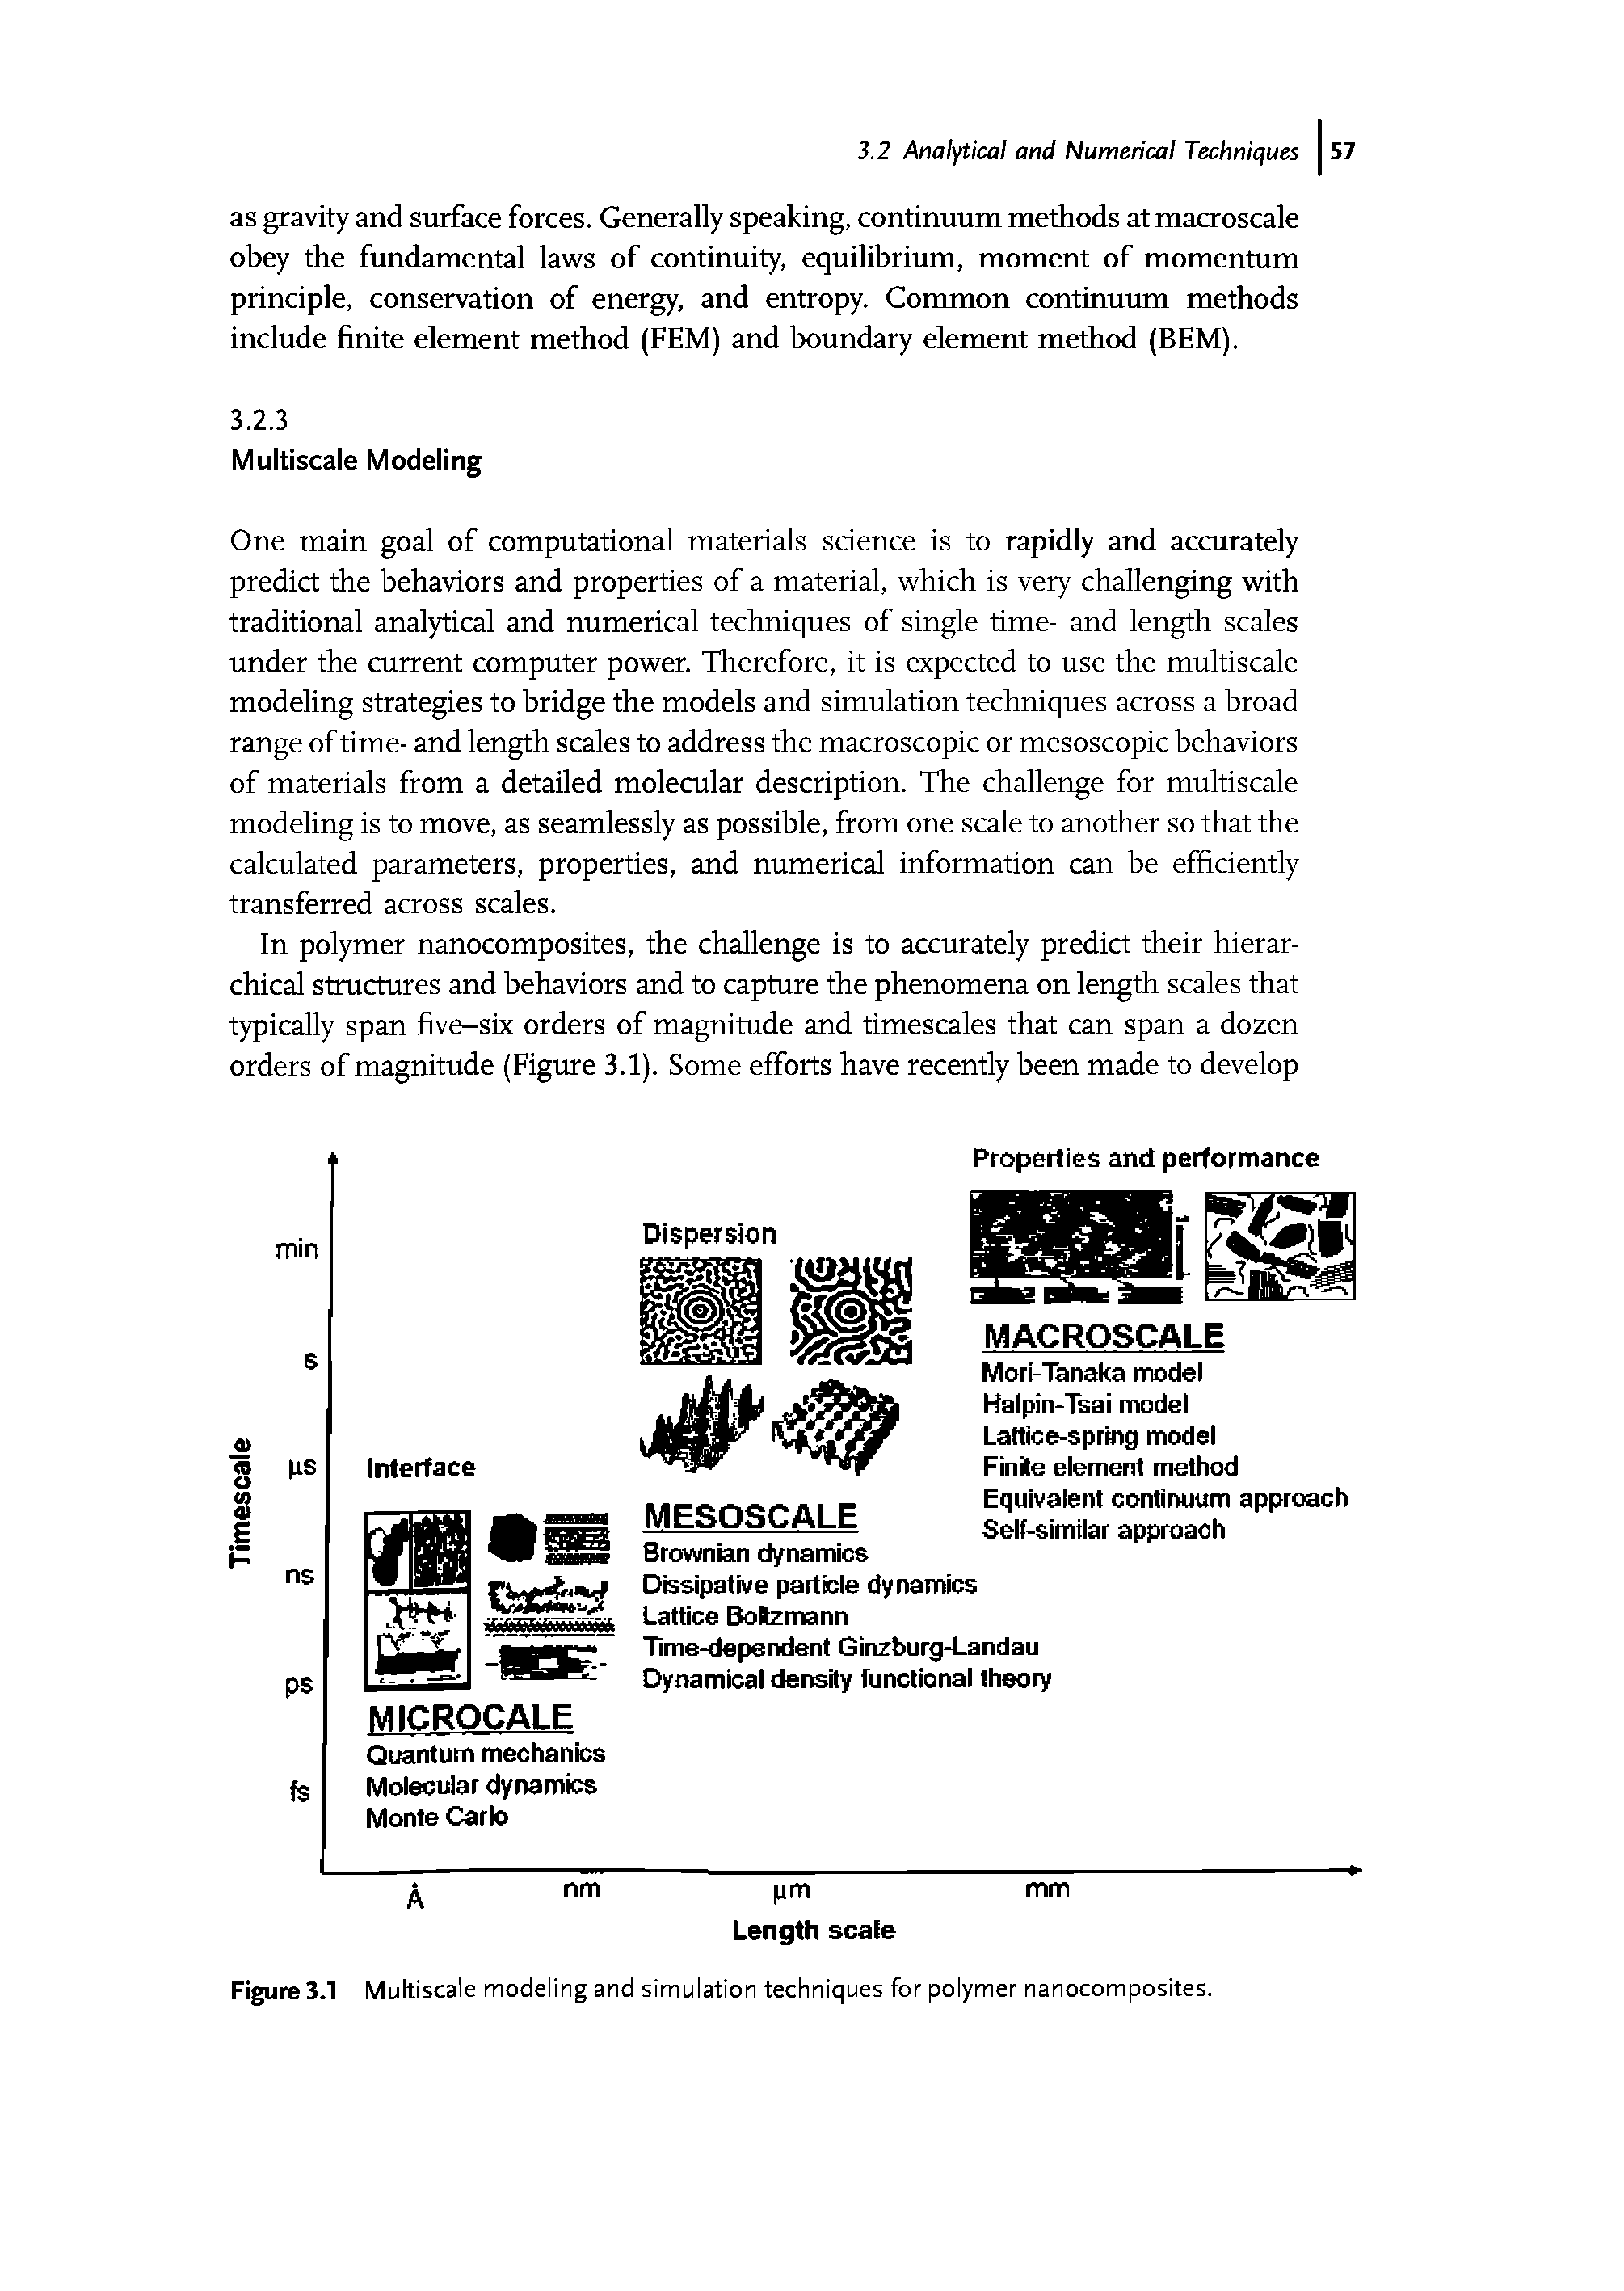 Figure 3.1 Multiscale modeling and simulation techniques for polymer nanocomposites.